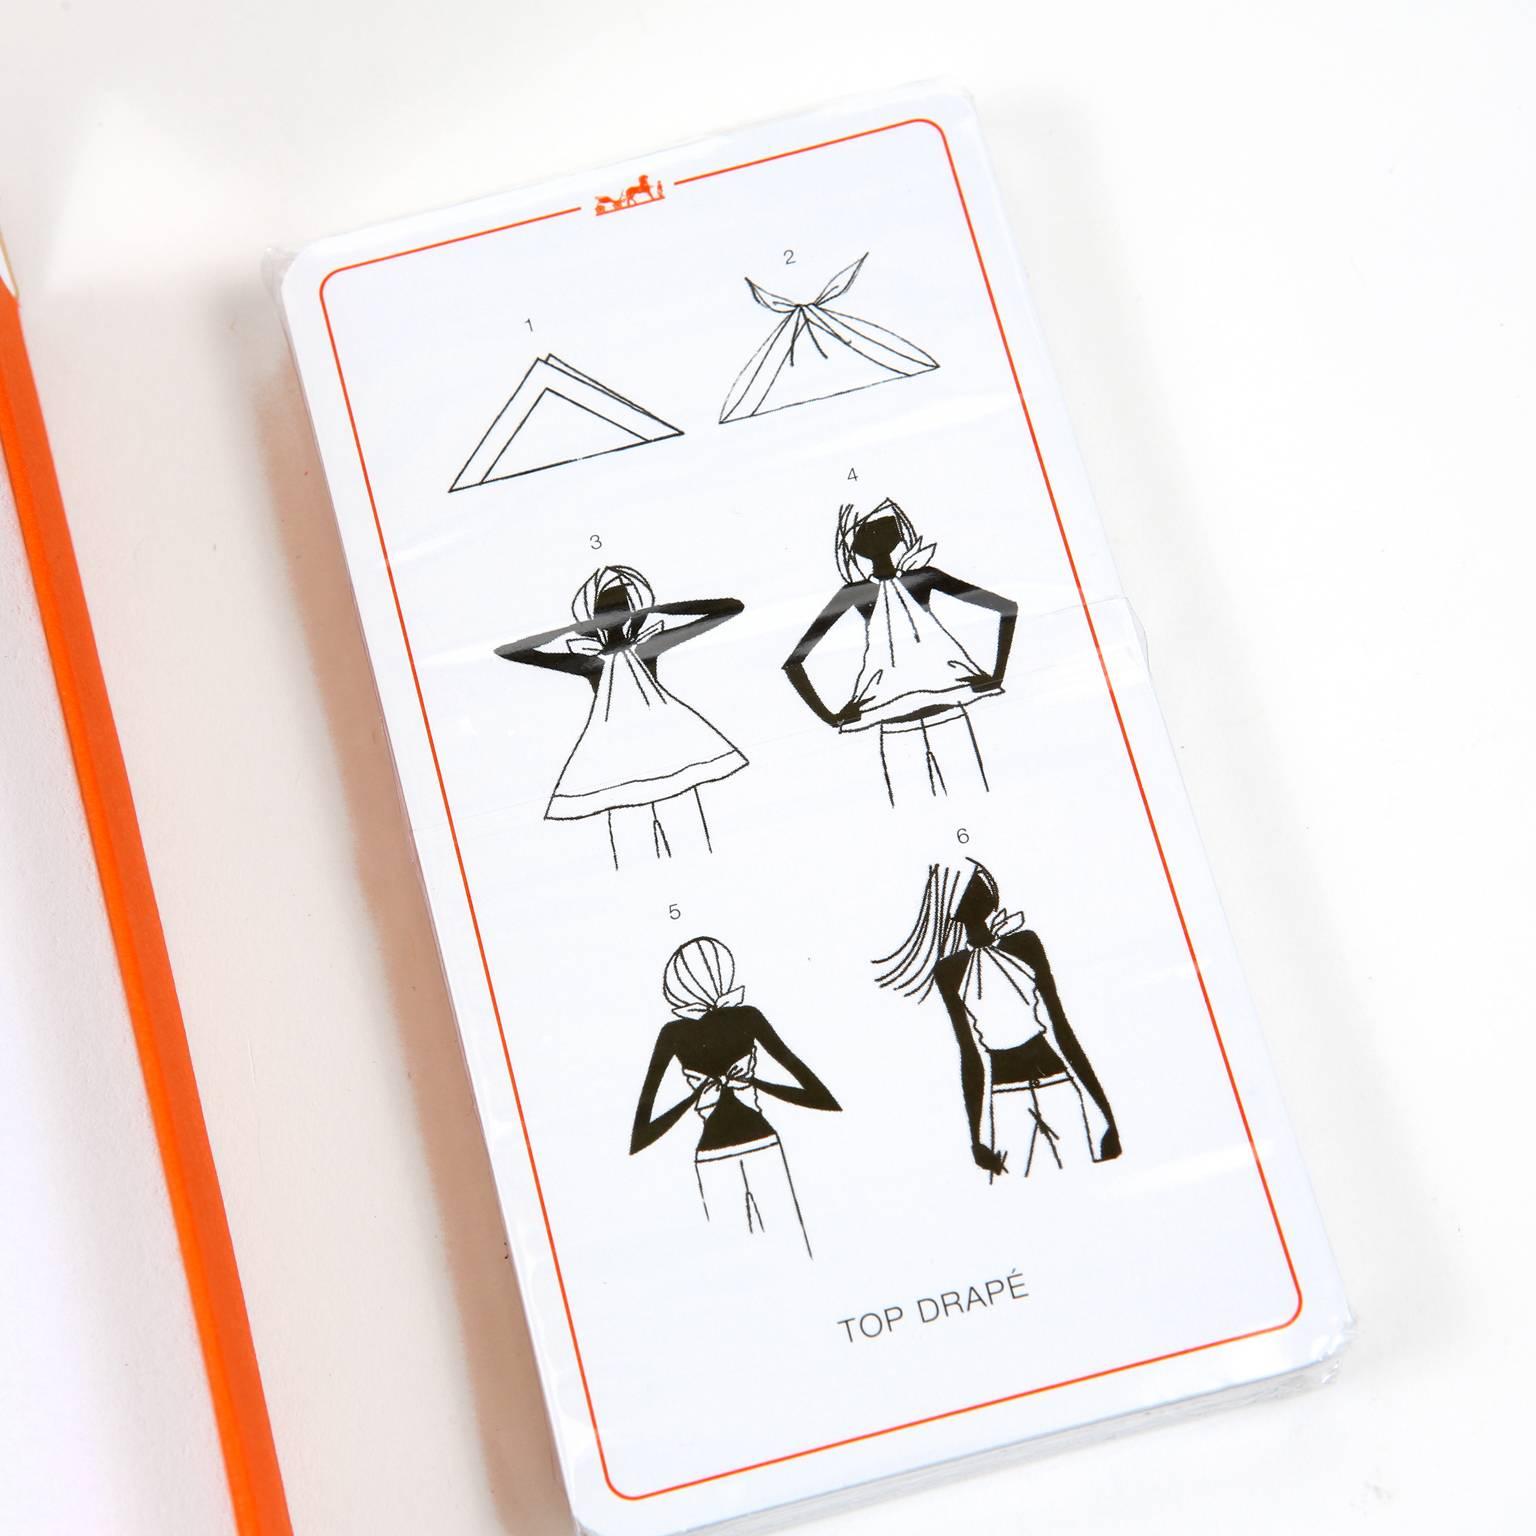 These authentic Hermès Scarf Knotting Cards are new with the box.  Illustrations with step by step directions and photos of the finished look on each card.  A perfect approach to finding new and creative ways to enjoy any scarf collection.  
A259
 
